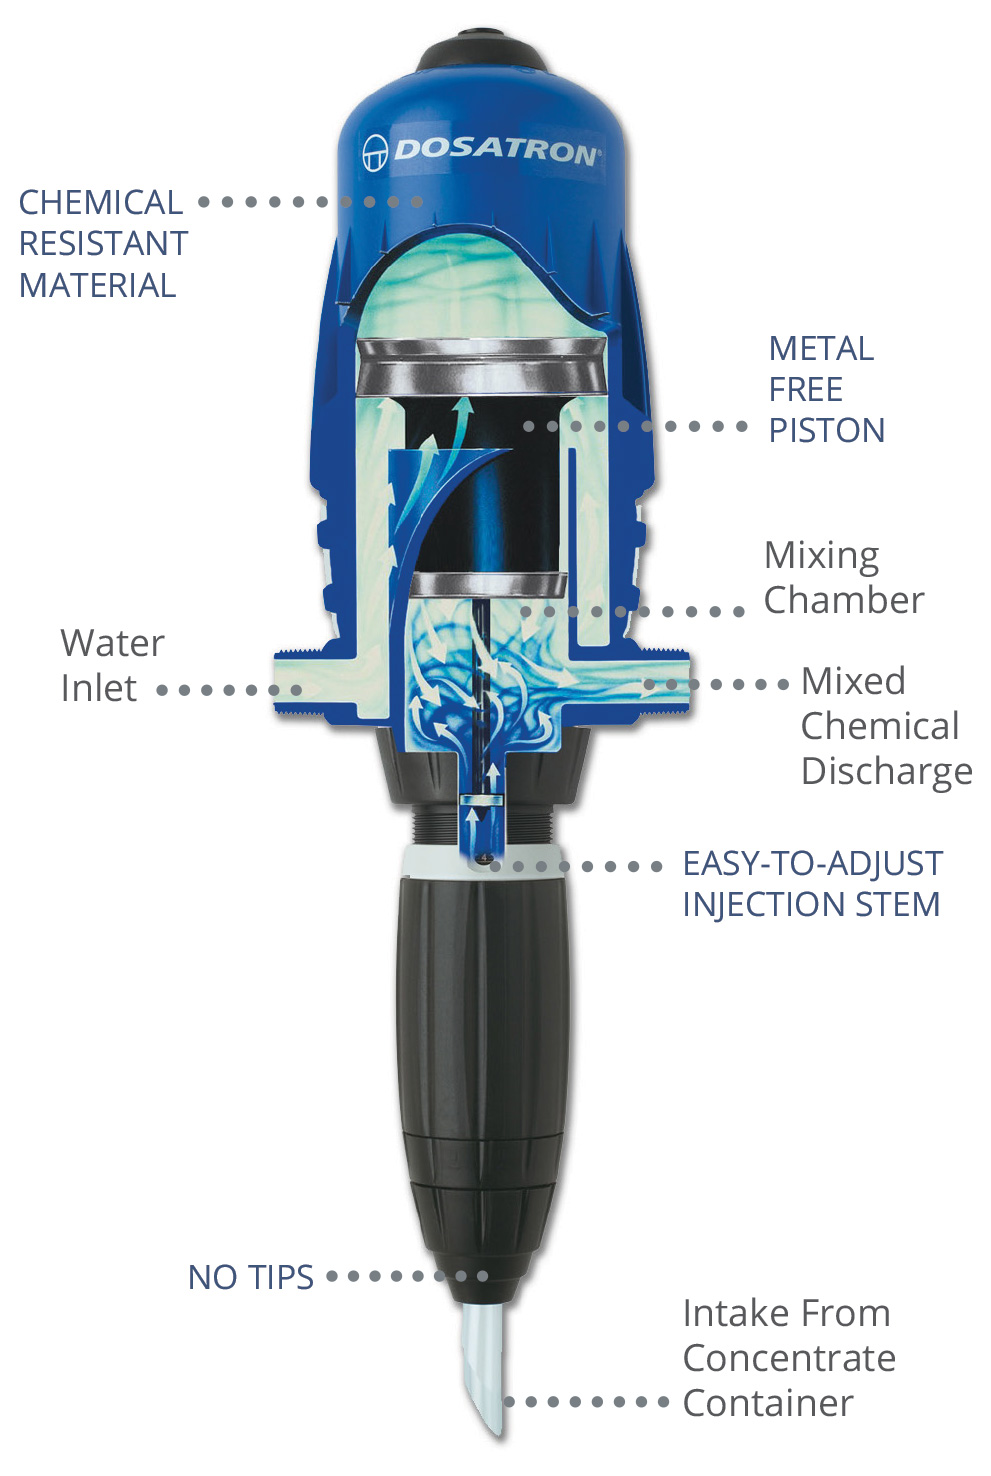 Picture of Chemical Injector, Kynar Body, MAX 14 GPM, 85 PSI, 20:1 to 200:1 Injection Ratio, 1/2" MPT, Kalrez Seal